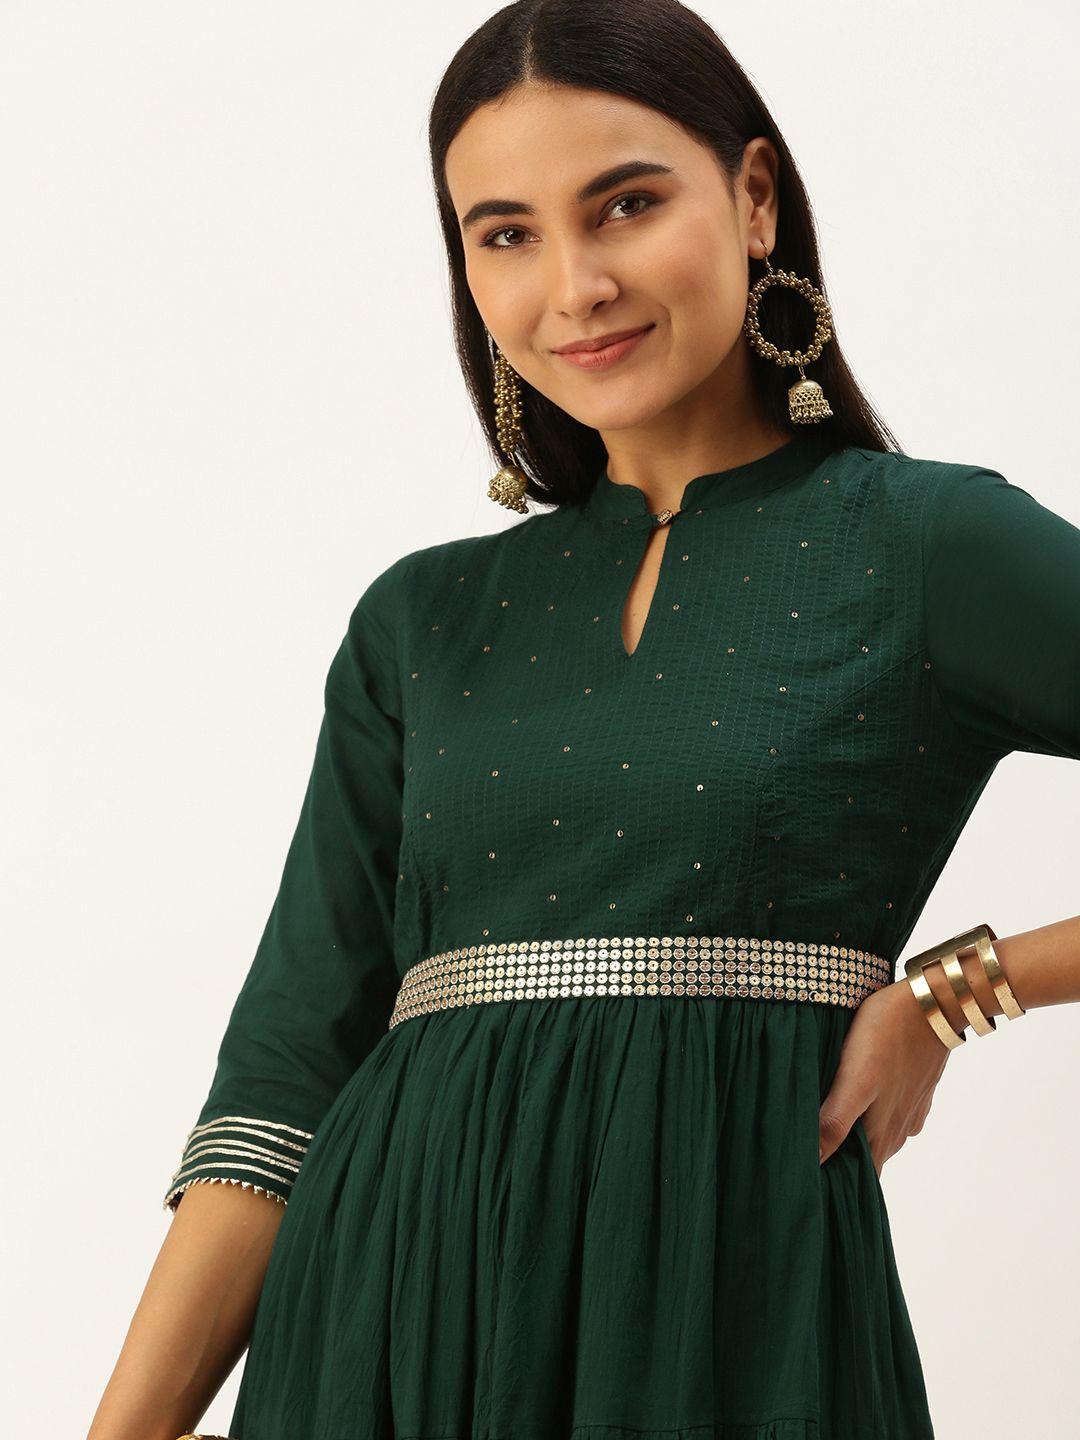 heeposh women green & gold-toned pure cotton foil printed ethnic dress with sequin detail